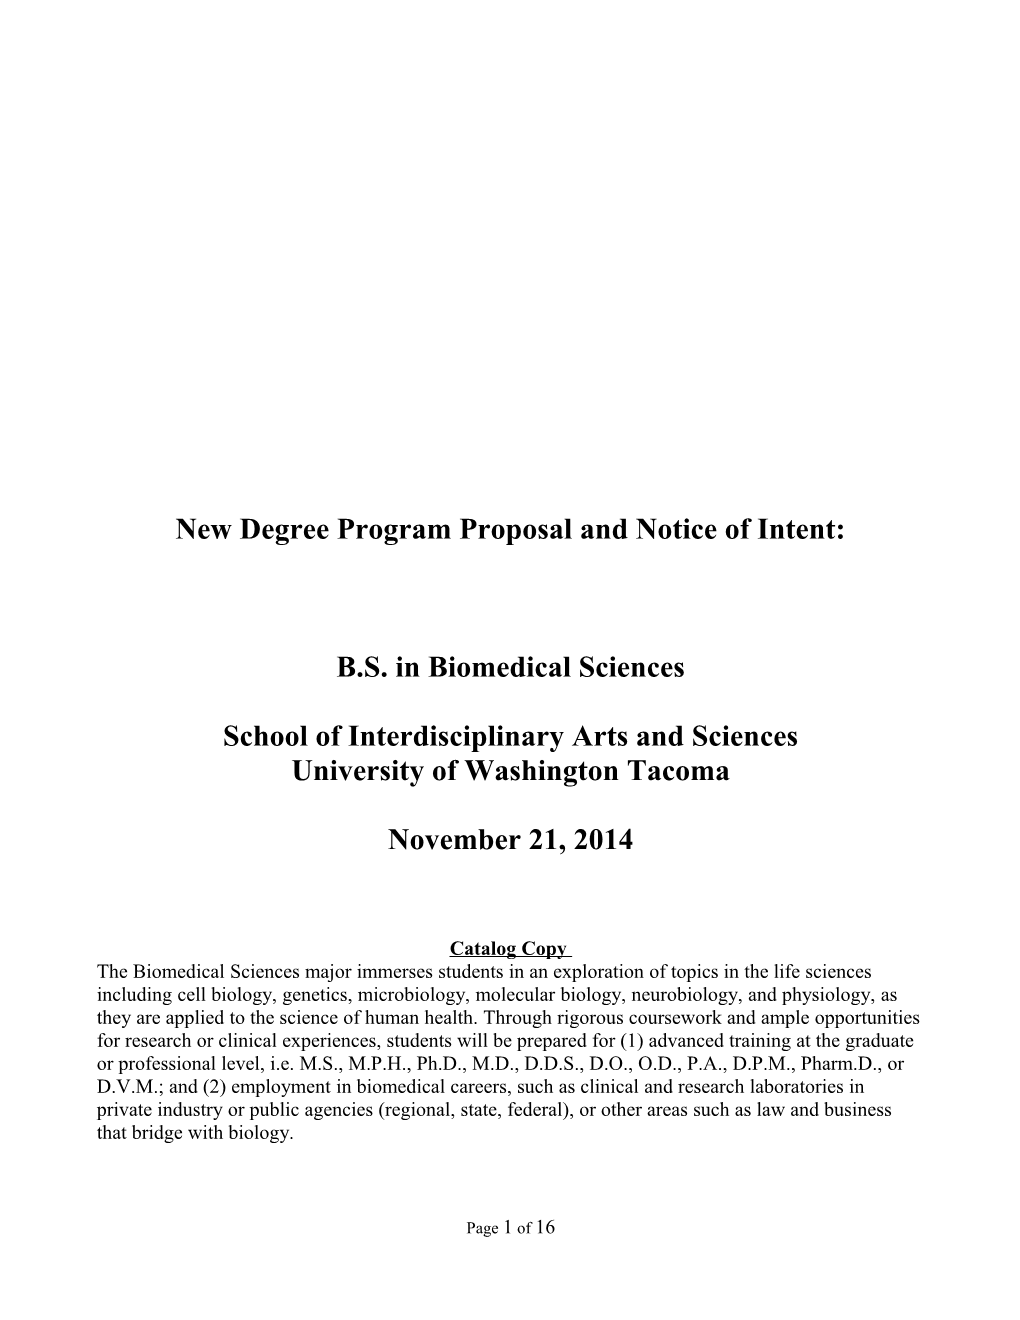 New Degree Program Proposal and Notice of Intent